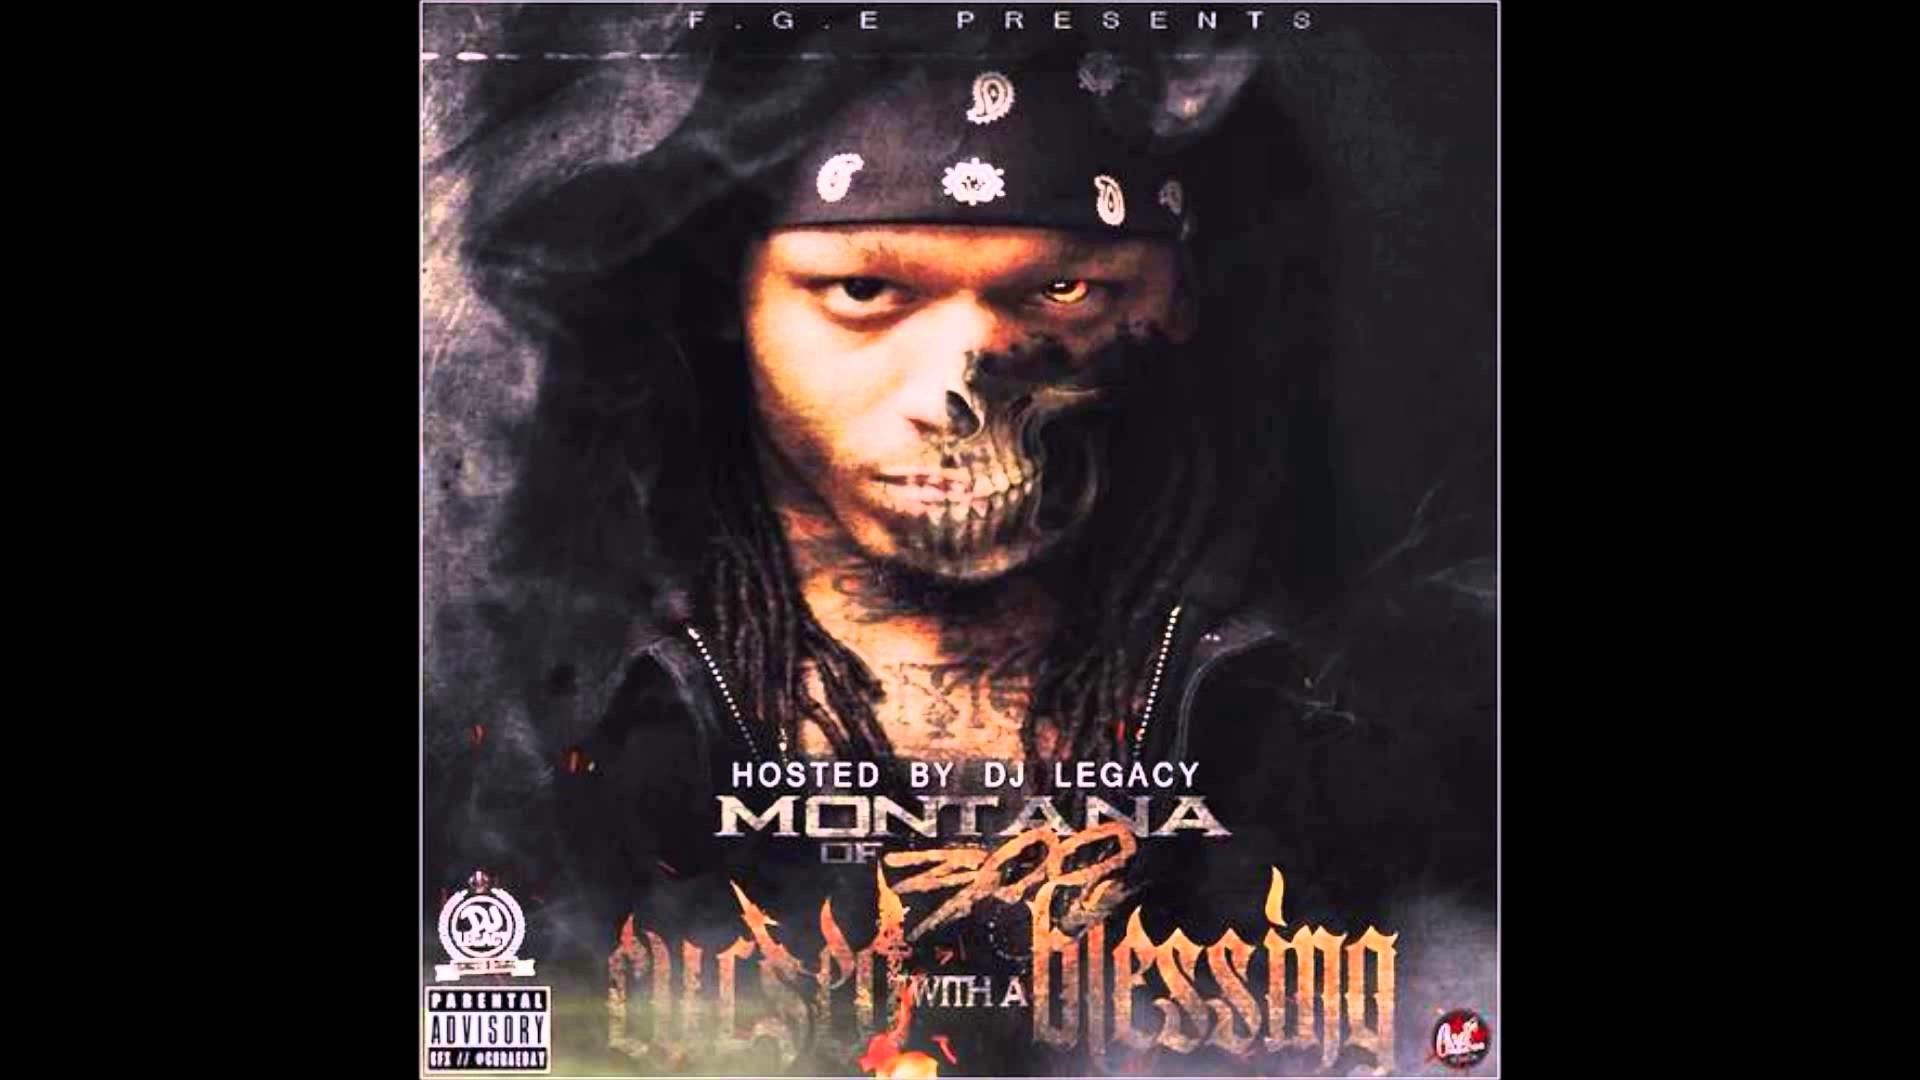 Data Src Montana Of 300 Wallpapers Iphone - Cursed With A Blessing Montana Of 300 - HD Wallpaper 